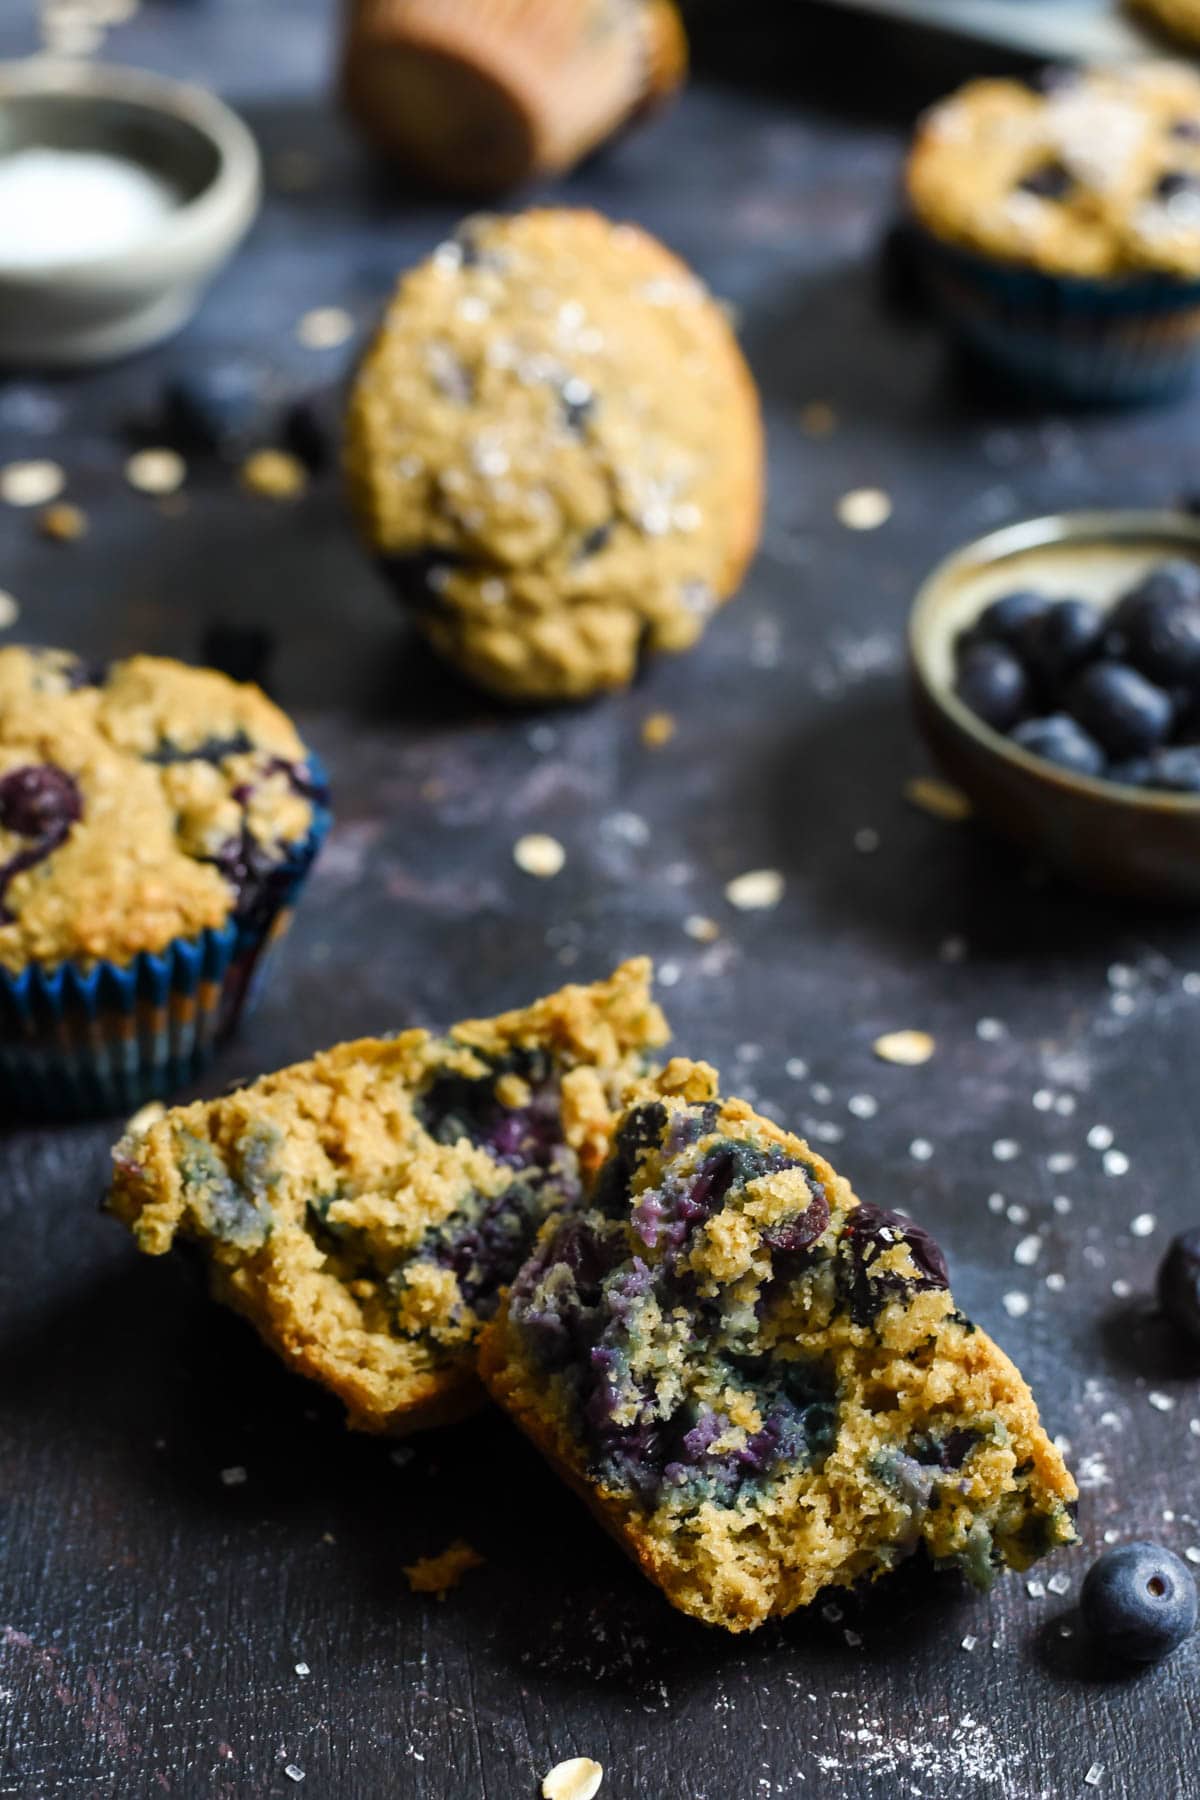 These Blueberry Oatmeal Muffins bursting with blueberries and made with Greek yogurt, coconut oil, and oats are a hearty, healthy way to start the day. They freeze great too!